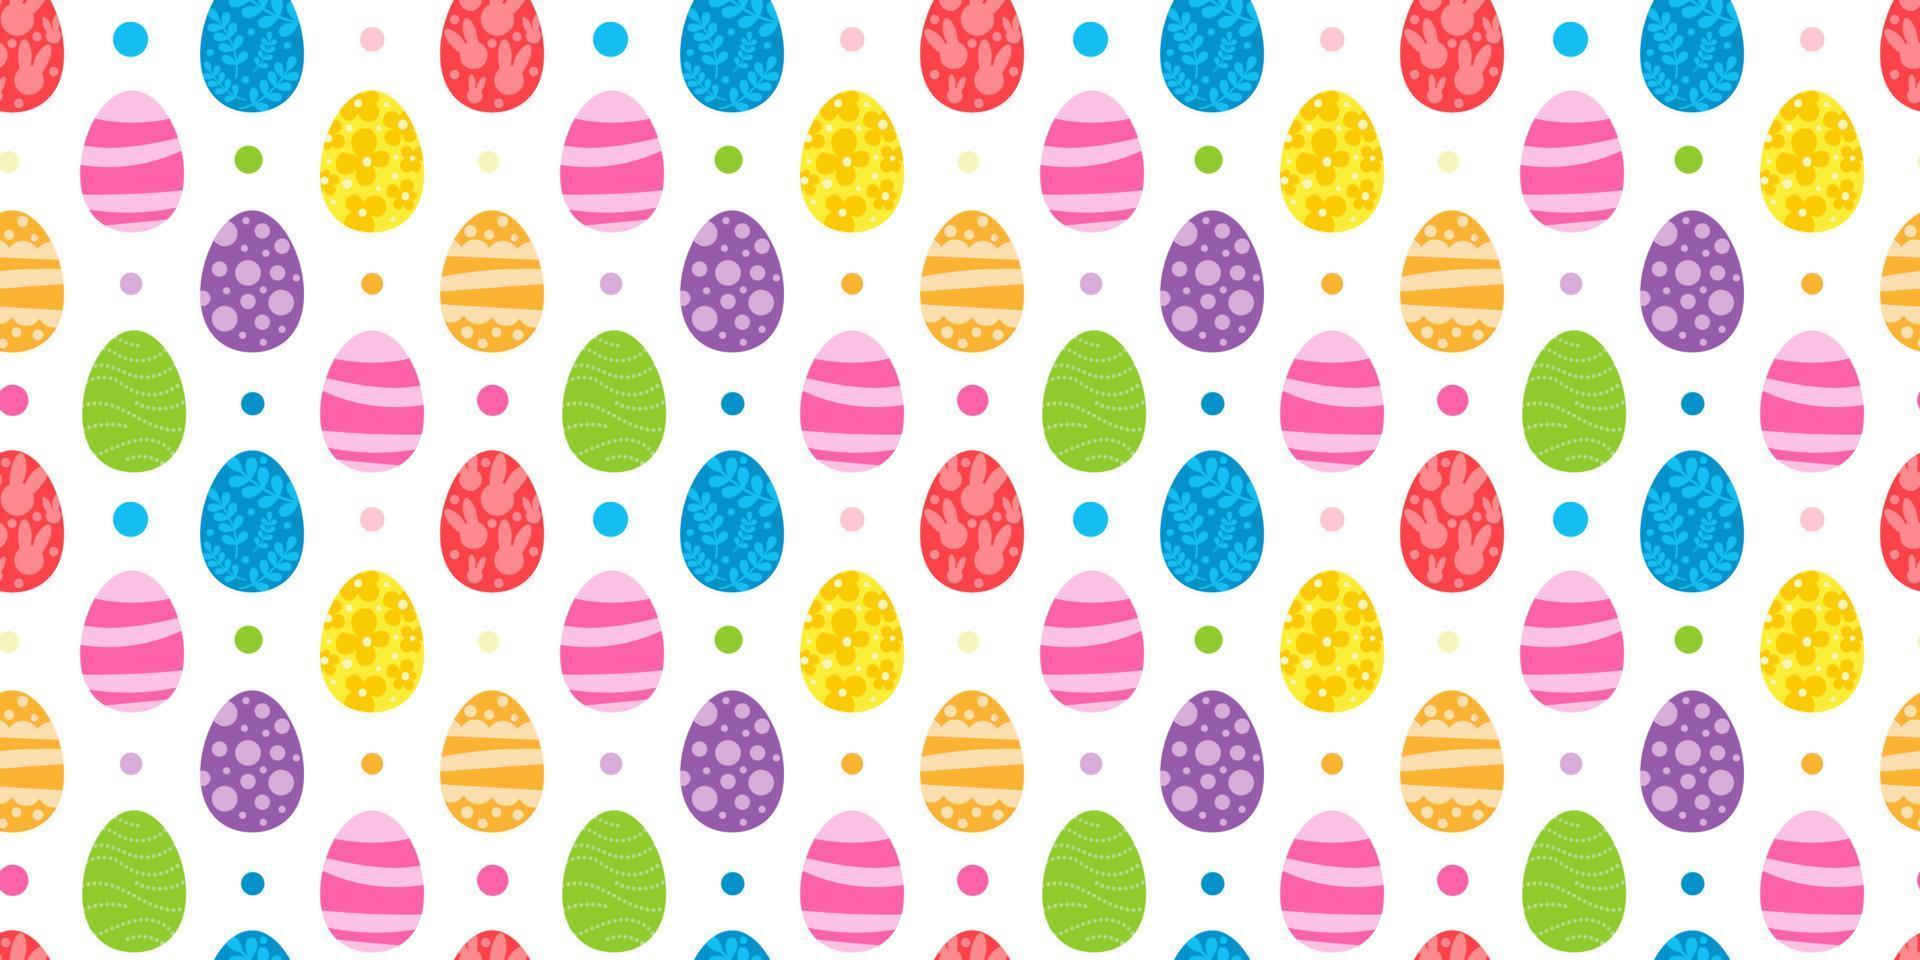 Vector seamless pattern. Background with many Rabbits, eggs, flowers, leaves scattered. Festive Easter Day surface pattern design. Spring season. For printing on fabric and paper, cards, social media